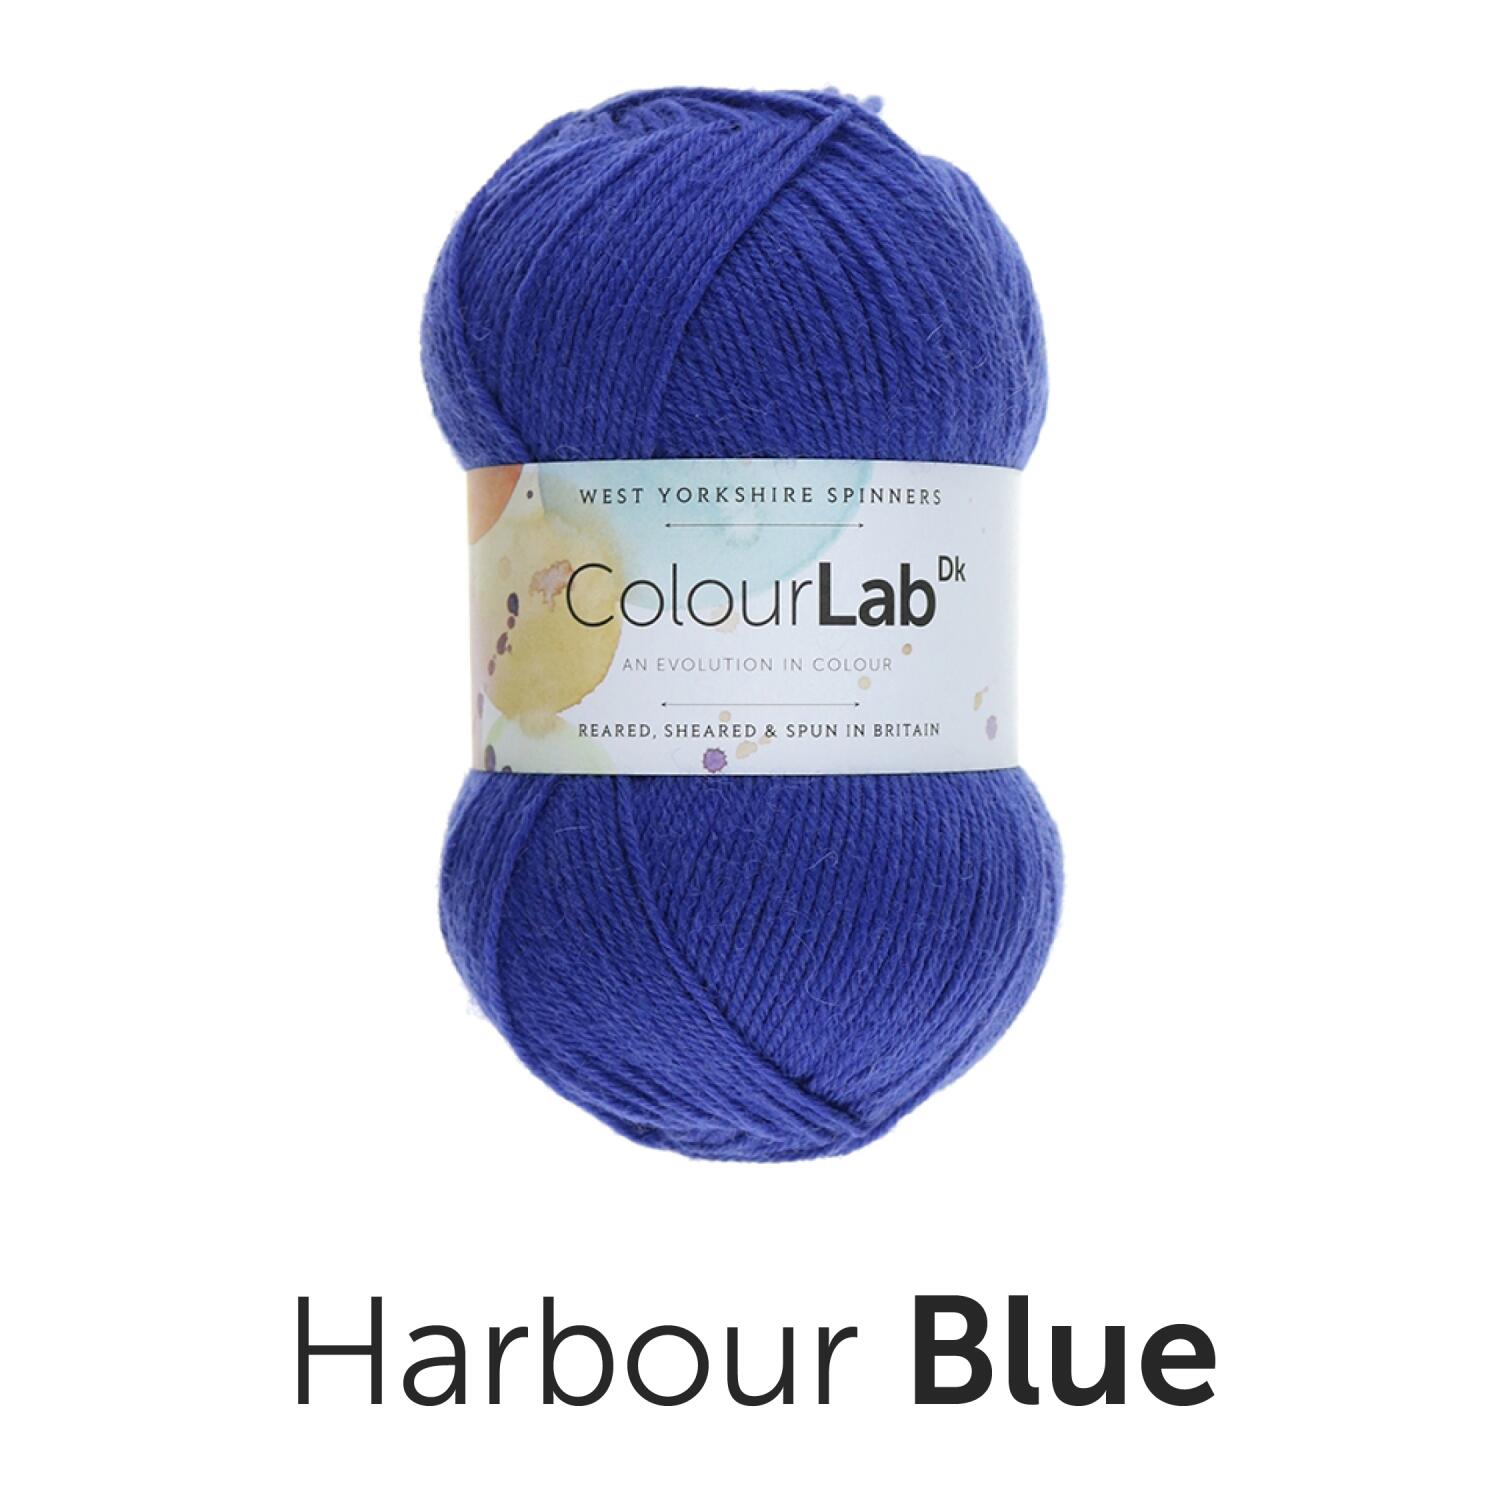 West Yorkshire Spinners ColourLab DK Unis Farbe: 746 harbour blue